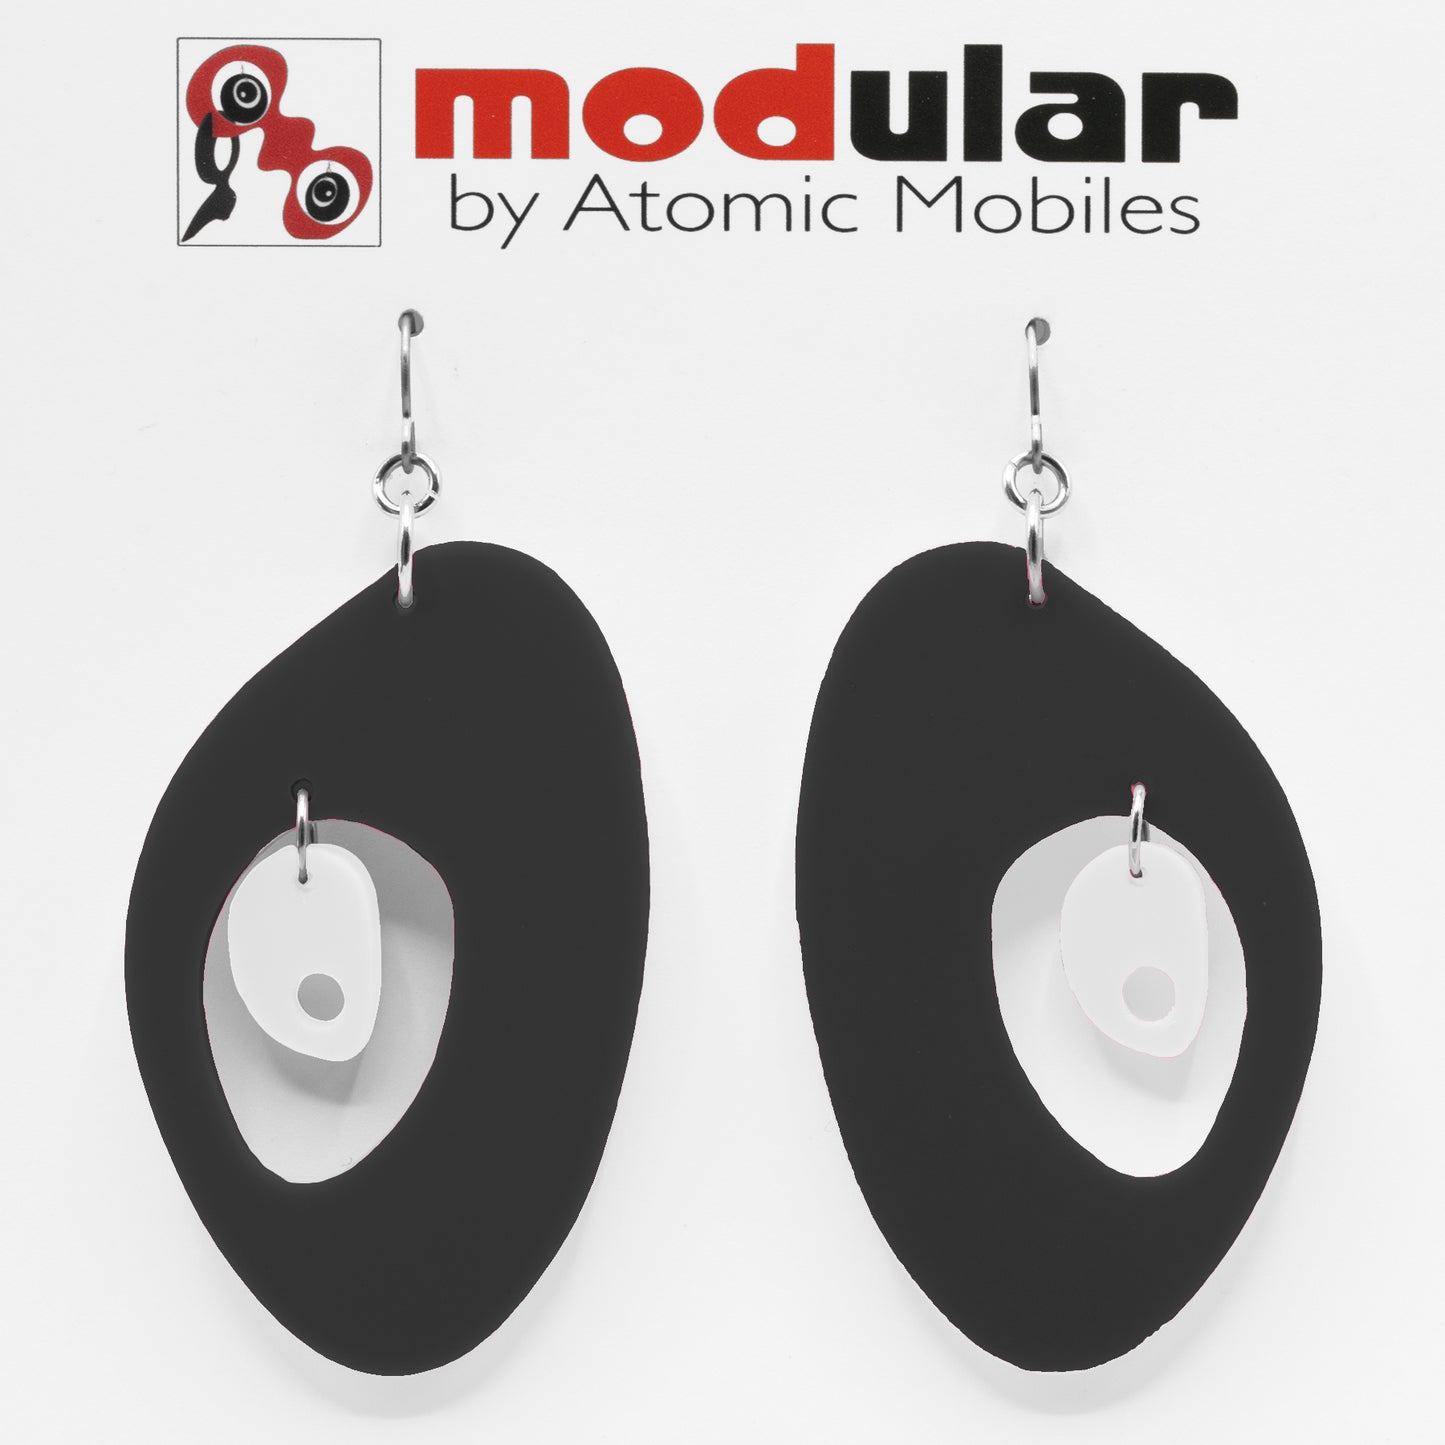 MODular Earrings - The Modernist Statement Earrings in Black and White by AtomicMobiles.com - retro era inspired mod handmade jewelry